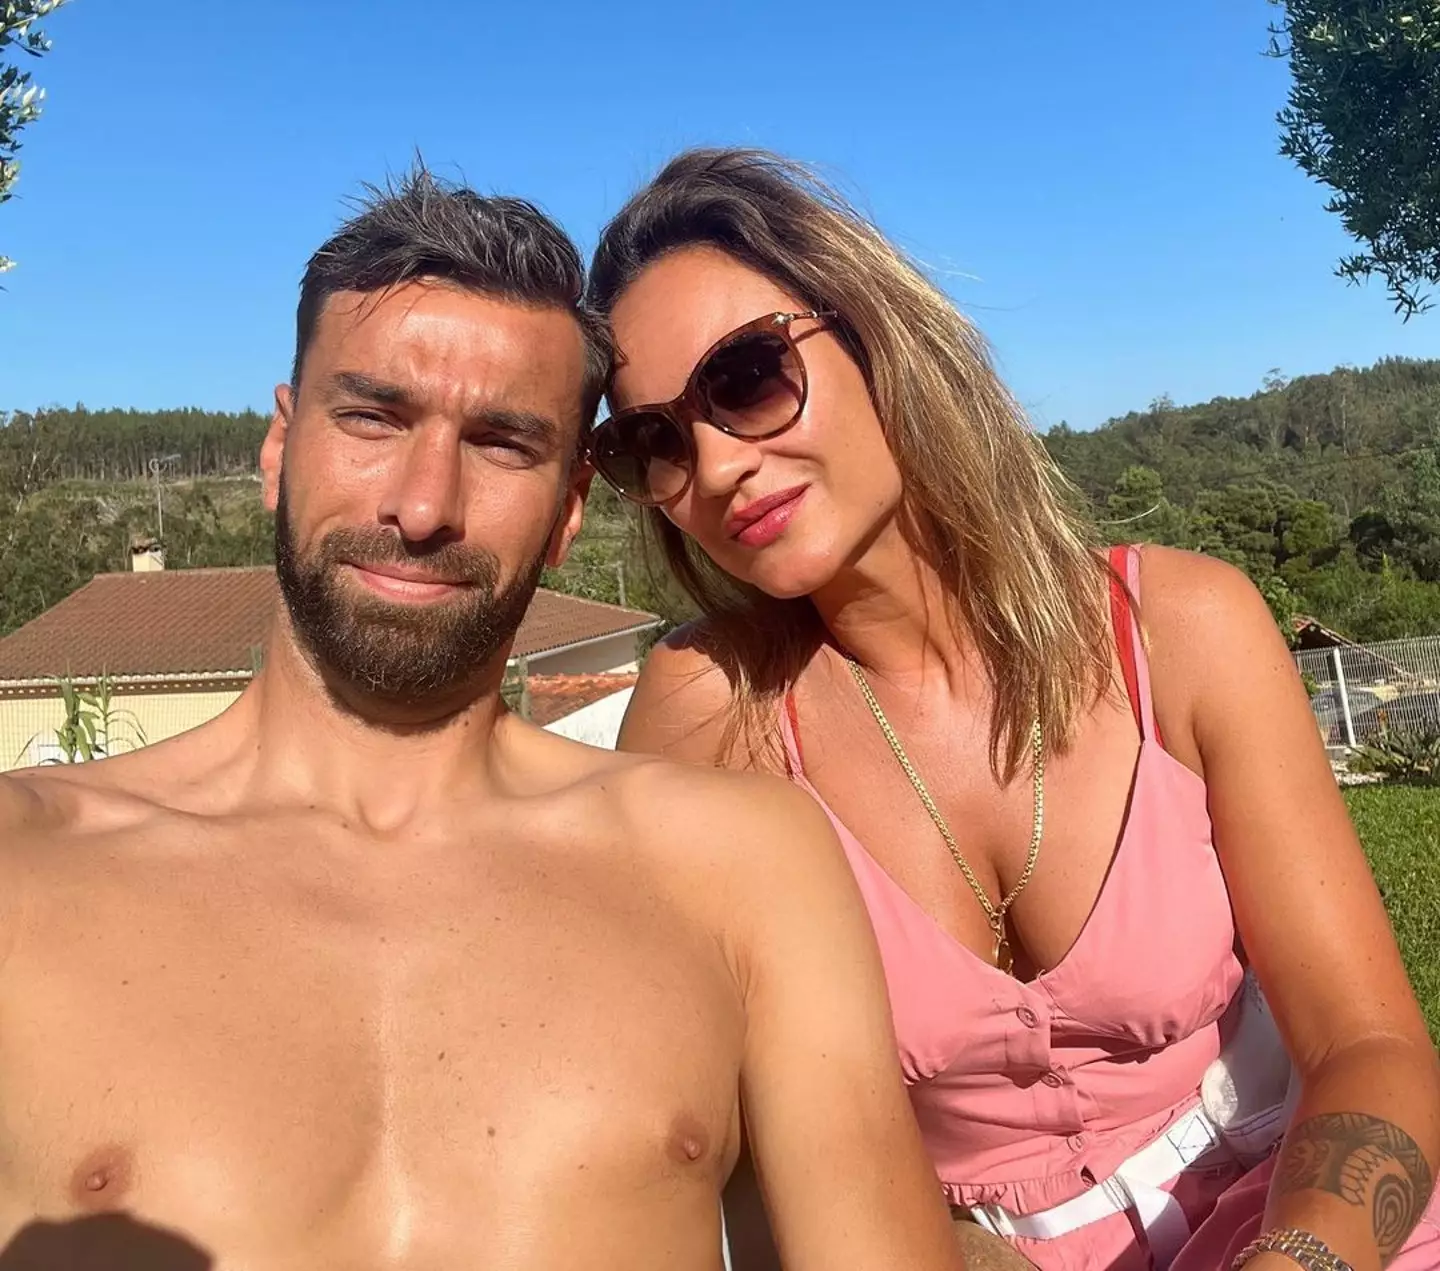 Portugal international Rui Patricio married sexologist Vera Ribeiro and the pair have had two children together.